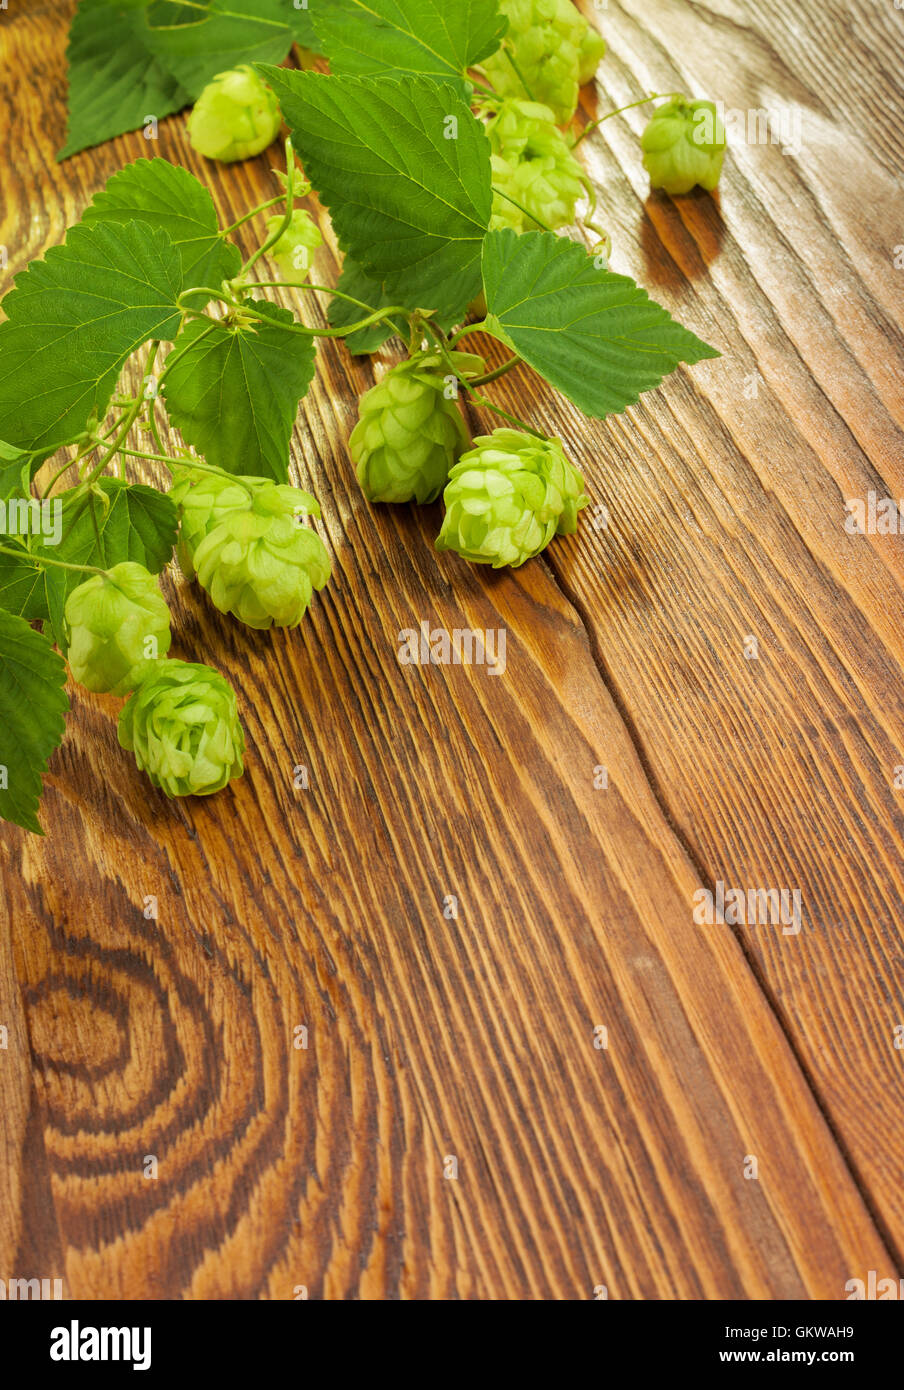 Hop plant on a wooden table Stock Photo